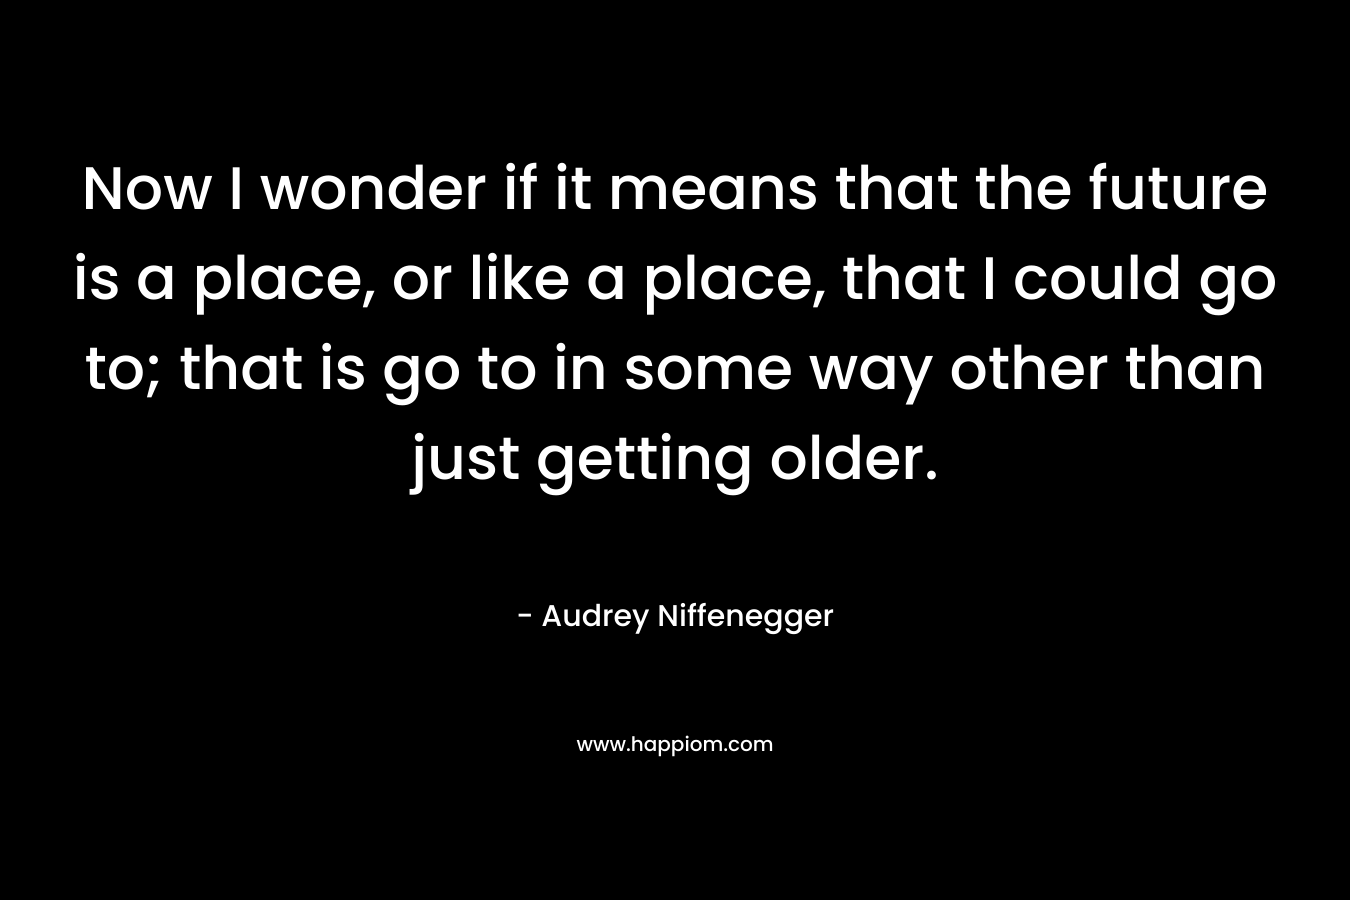 Now I wonder if it means that the future is a place, or like a place, that I could go to; that is go to in some way other than just getting older. – Audrey Niffenegger